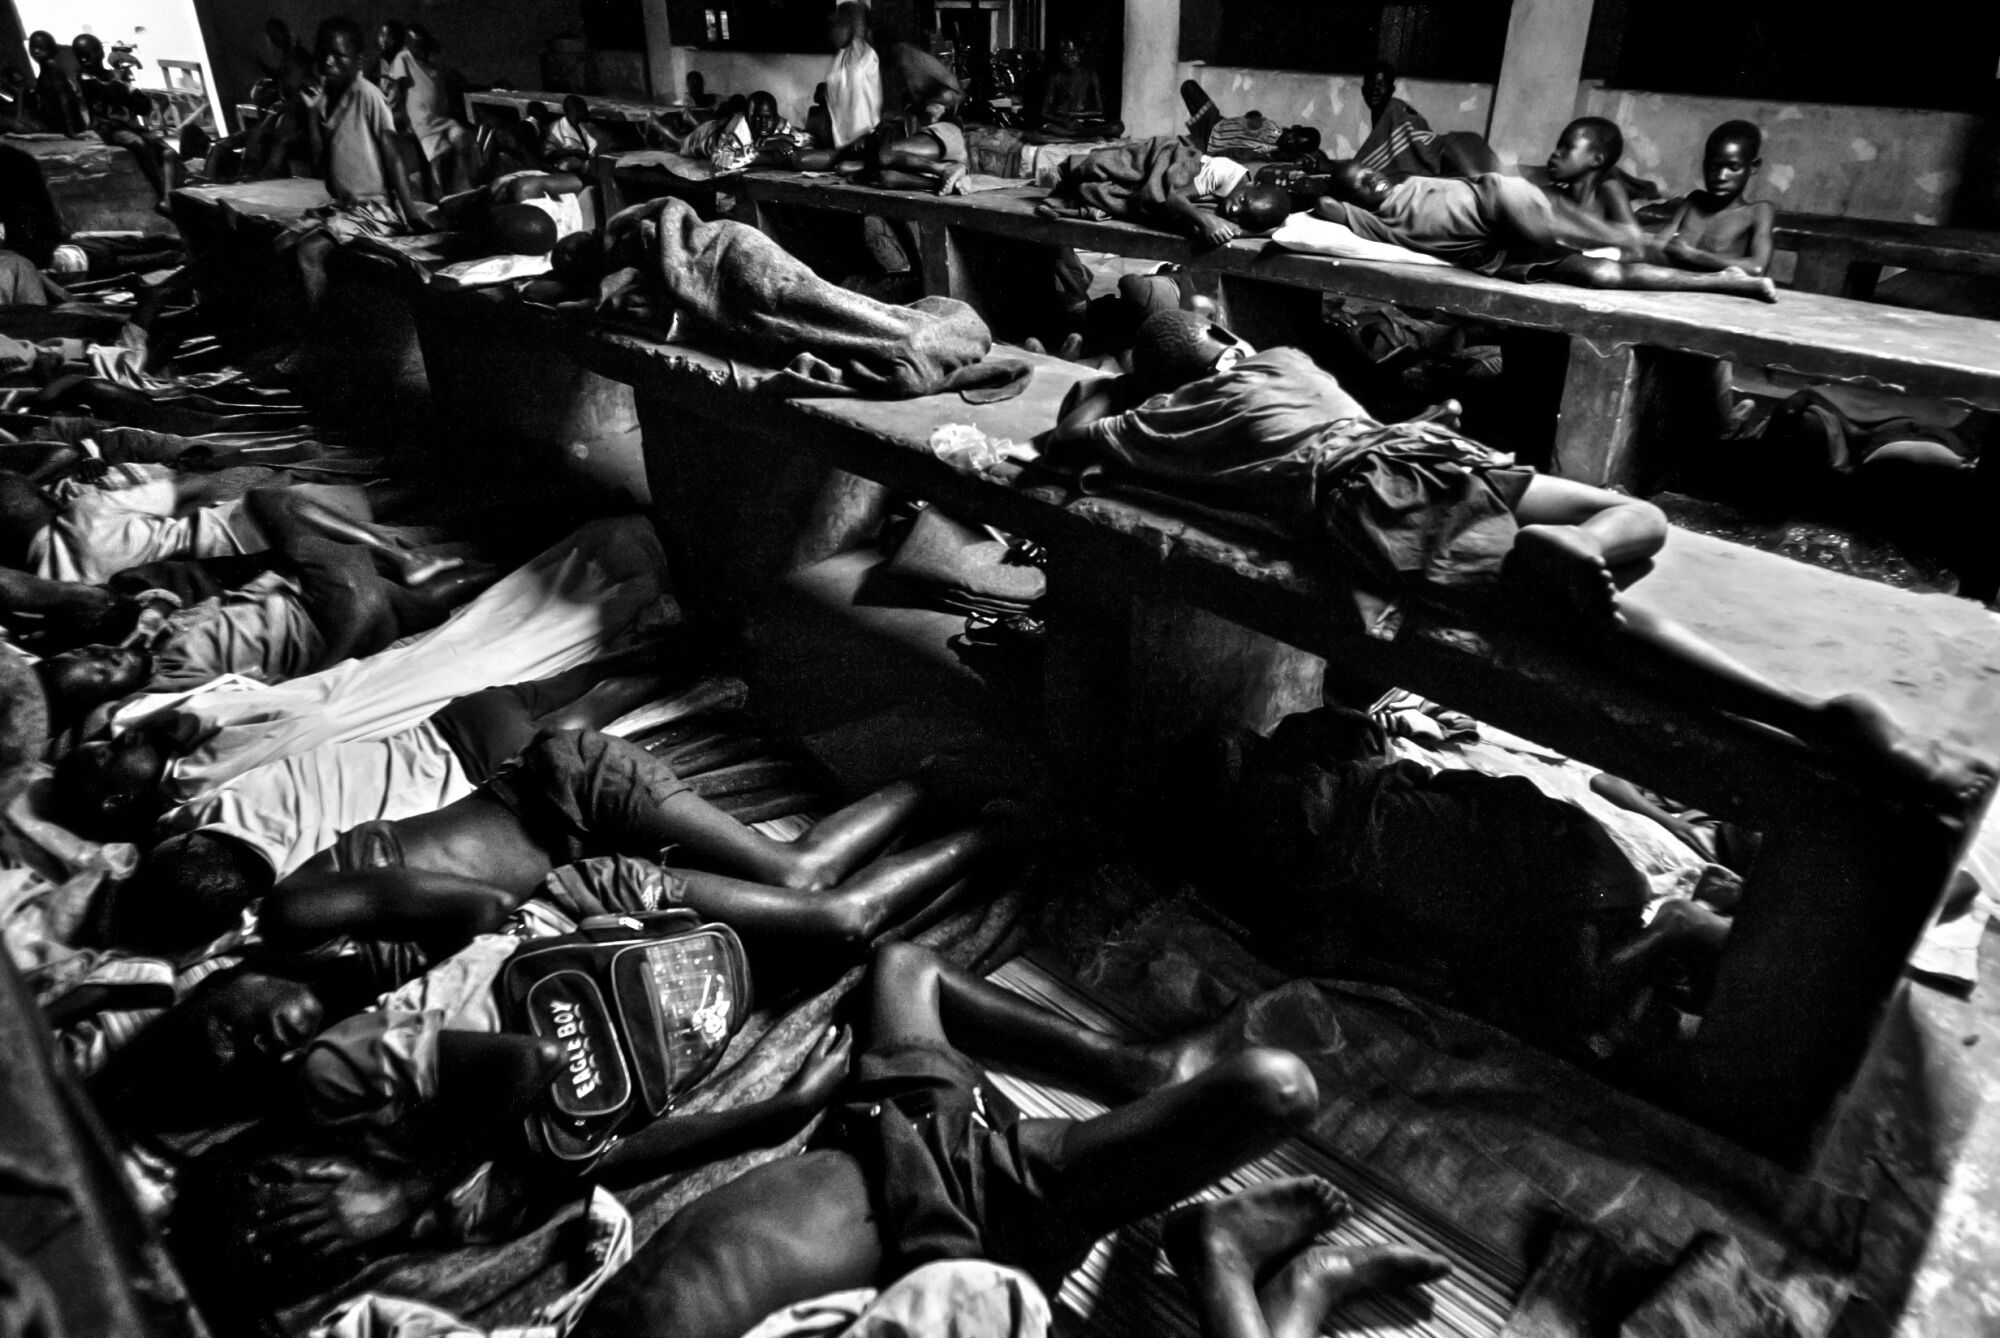 Children sleep closely packed together in a black and white image